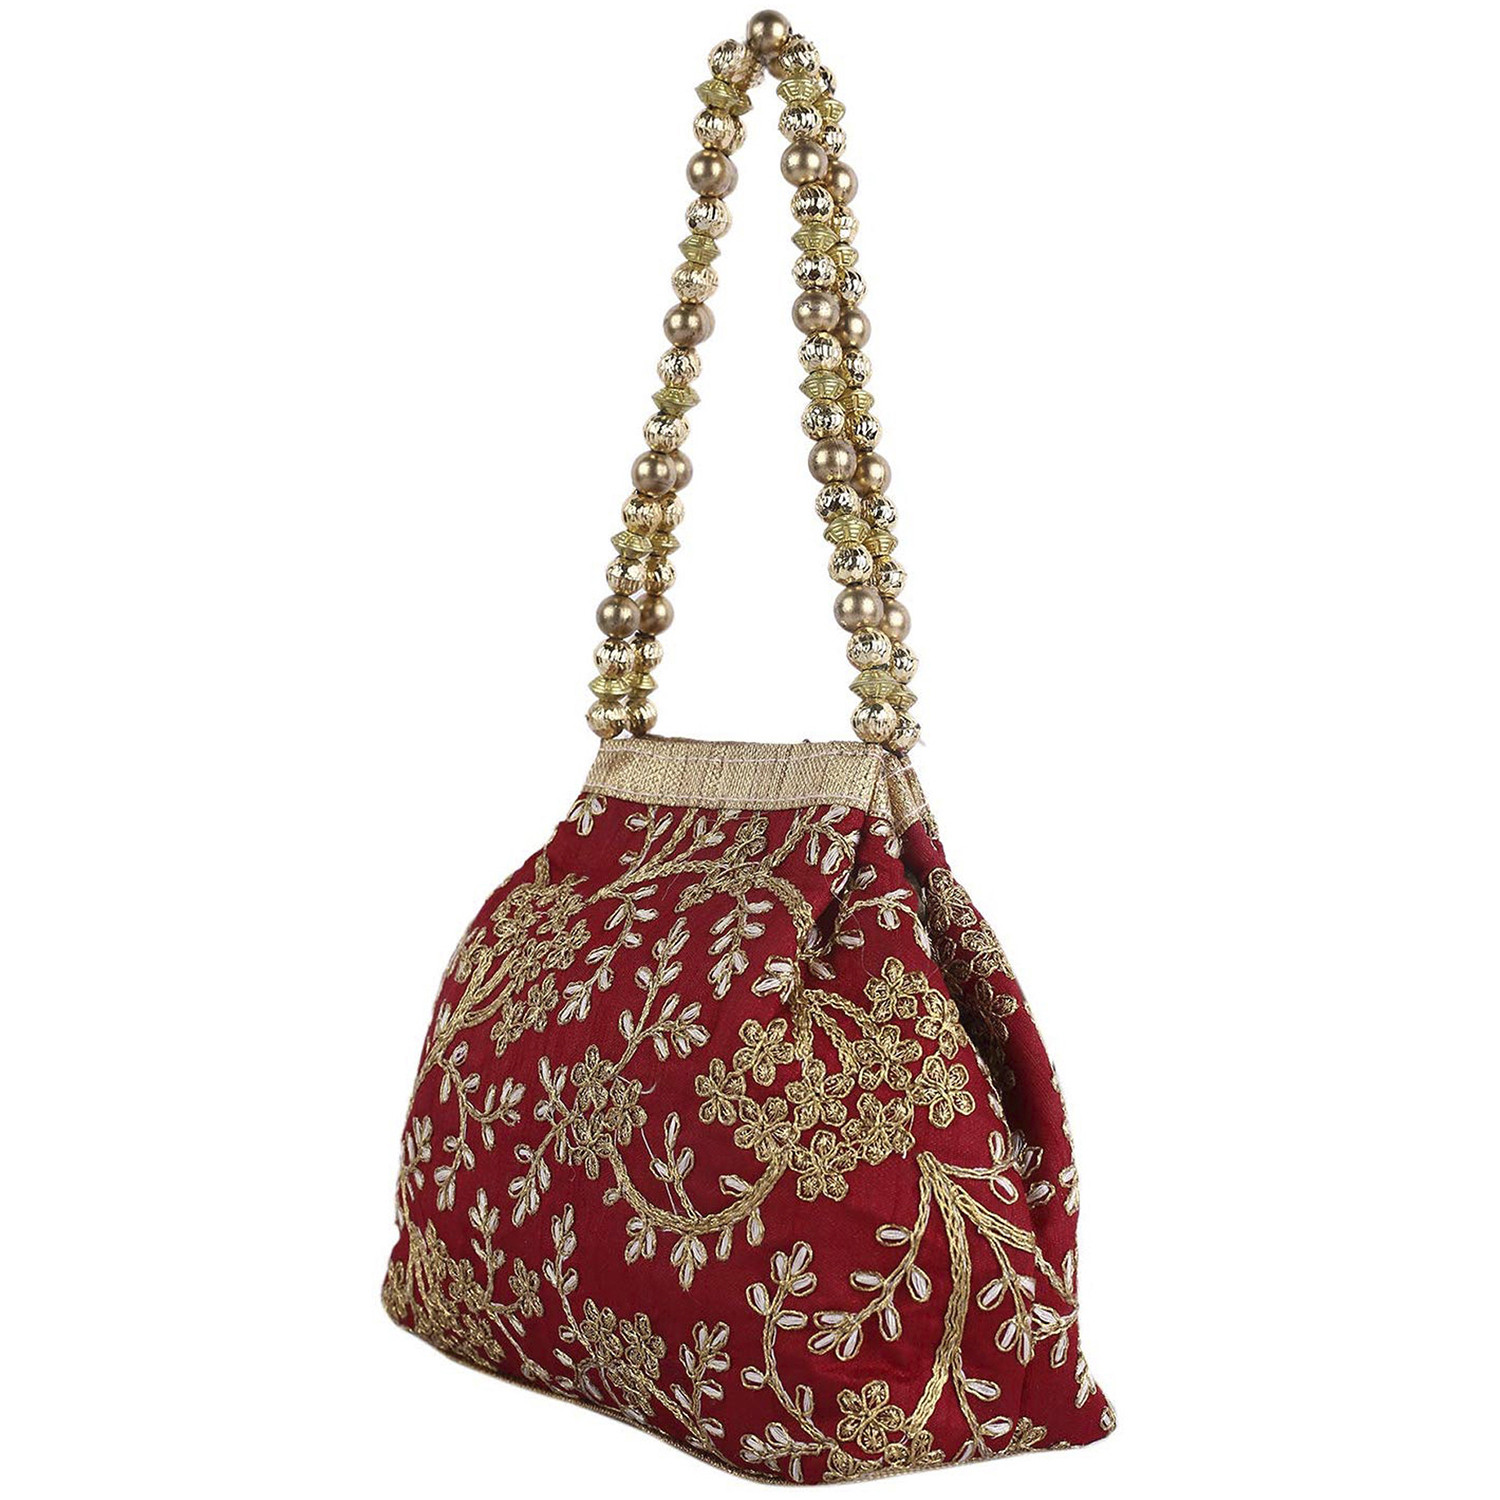 Kuber Industries Attractive Embroidery Polyester Hand Purse & Artificial Pearls Handle With 3 Magnetic Lock for Woman,Girls (Marron)